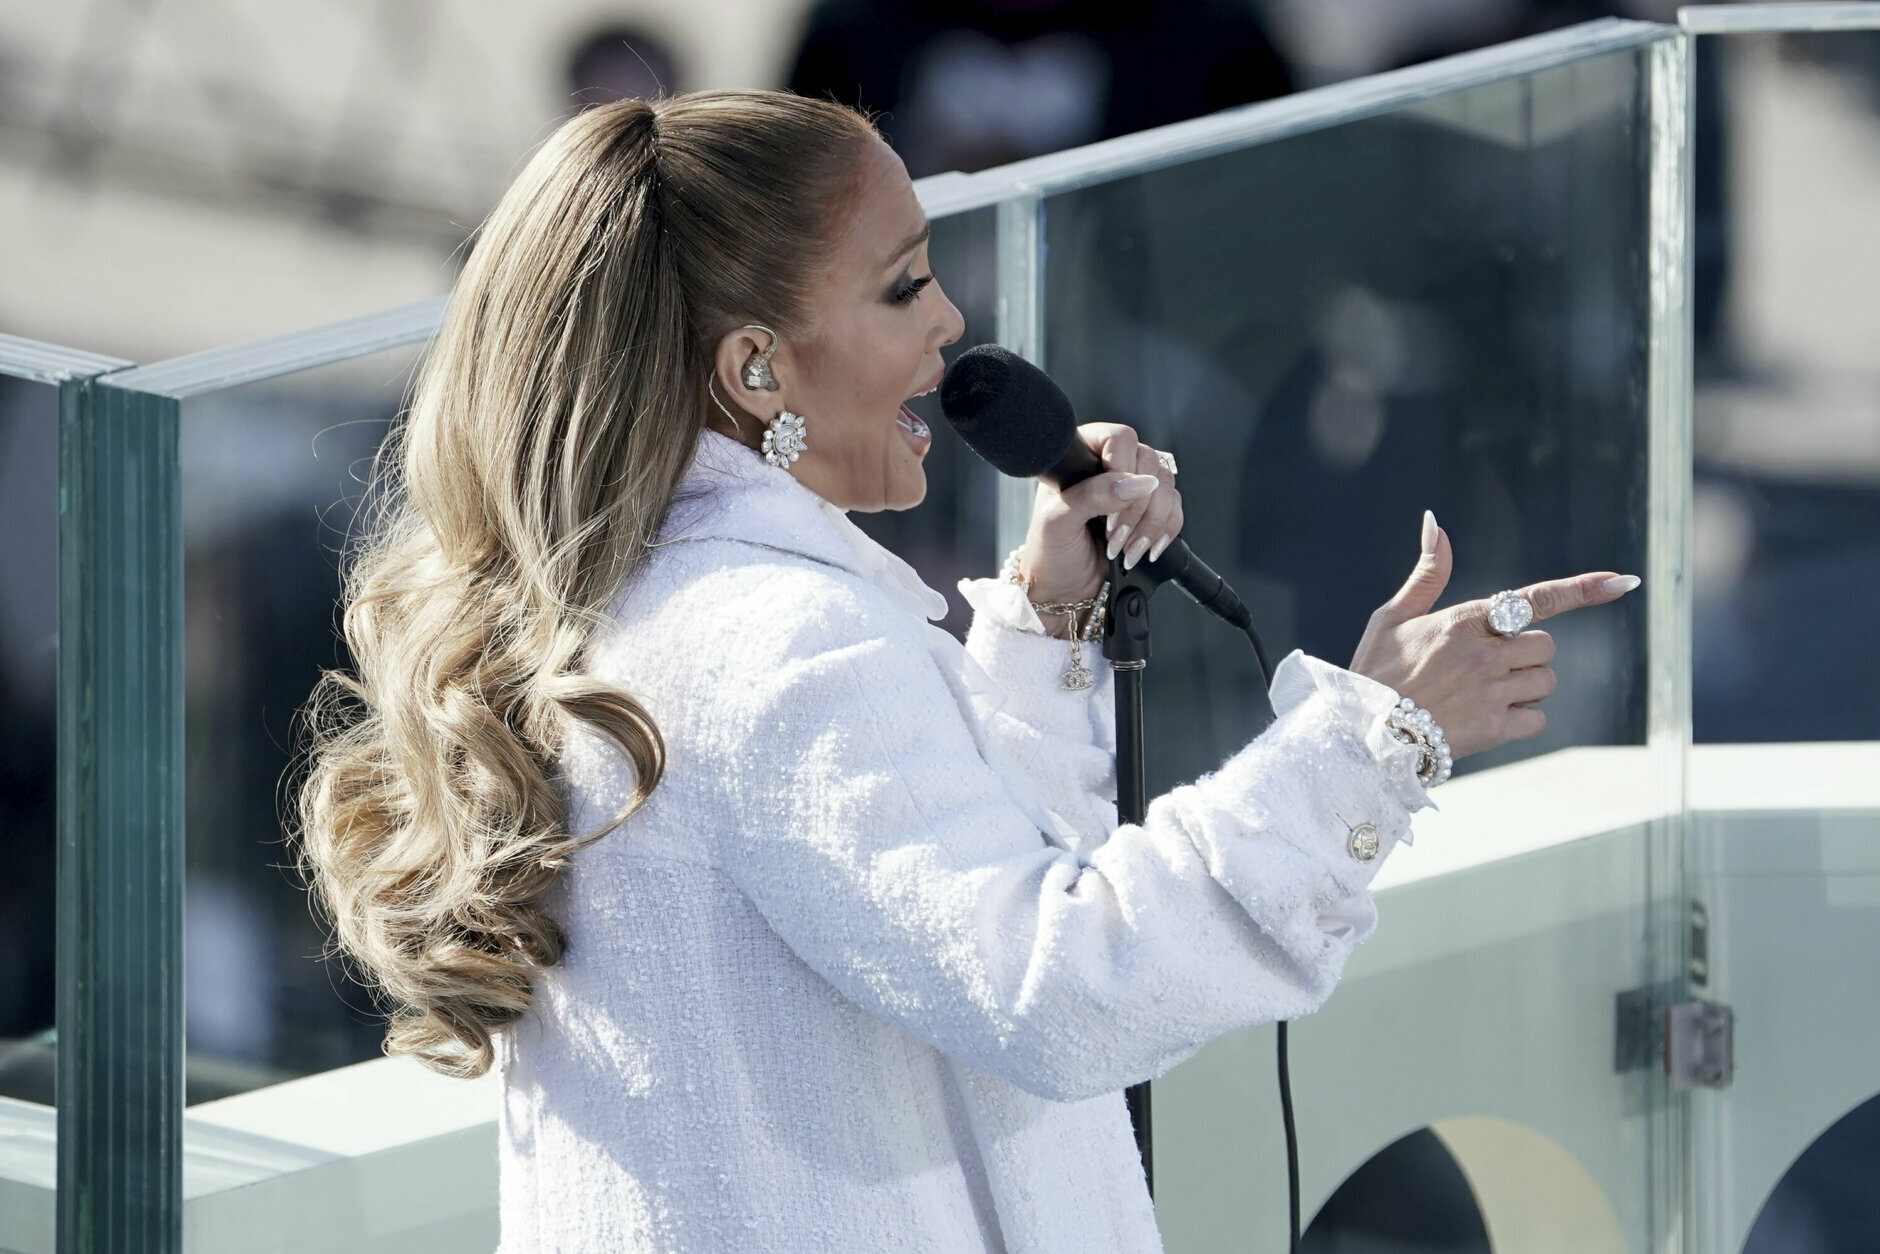 <p>Jennifer Lopez, dressed all in white, delivered a medley of “This Land is Your Land” and “America the Beautiful.”</p>
<blockquote class="twitter-tweet tw-align-center">
<p dir="ltr" lang="en">Let&#8217;s get loud&#8230; for our next president and vice president of the United States!</p>
<p>Thank you <a href="https://twitter.com/JLo?ref_src=twsrc%5Etfw">@JLo</a> for coming and being a part of this historic moment! <a href="https://twitter.com/hashtag/InaugurationDay?src=hash&amp;ref_src=twsrc%5Etfw">#InaugurationDay</a> <a href="https://t.co/nNNtqk7pRC">pic.twitter.com/nNNtqk7pRC</a></p>
<p>— Biden Inaugural Committee (@BidenInaugural) <a href="https://twitter.com/BidenInaugural/status/1351955914887102464?ref_src=twsrc%5Etfw">January 20, 2021</a></p></blockquote>
<p><script async src="https://platform.twitter.com/widgets.js" charset="utf-8"></script></p>
